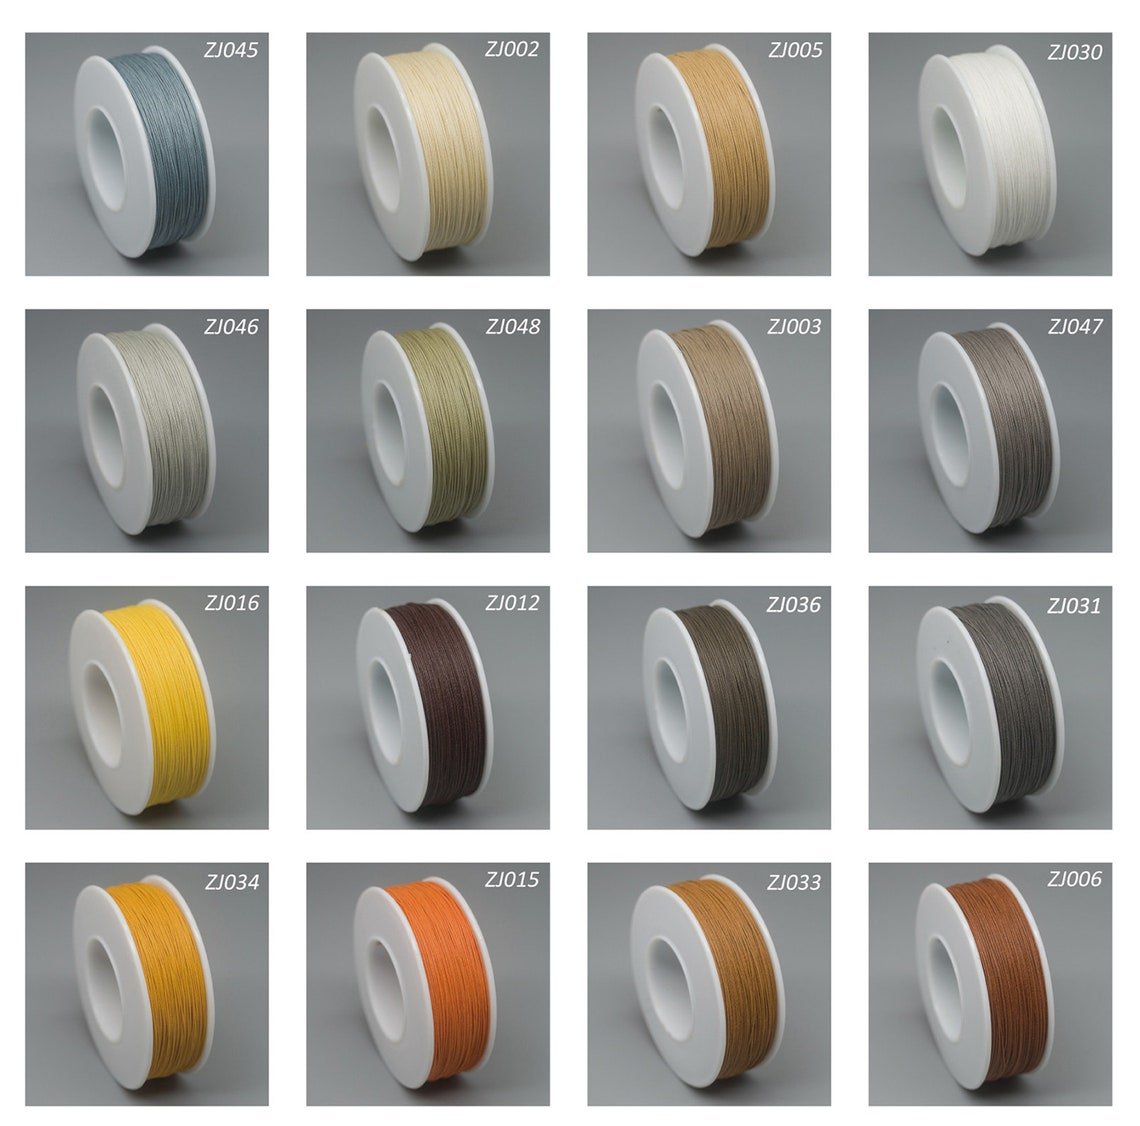 Famous ZJ#0 0.32-0.35mm Linen Waxed Threads For Handmade Letherwork, Thread For Leather, Sewing Thread ThreadsZJ